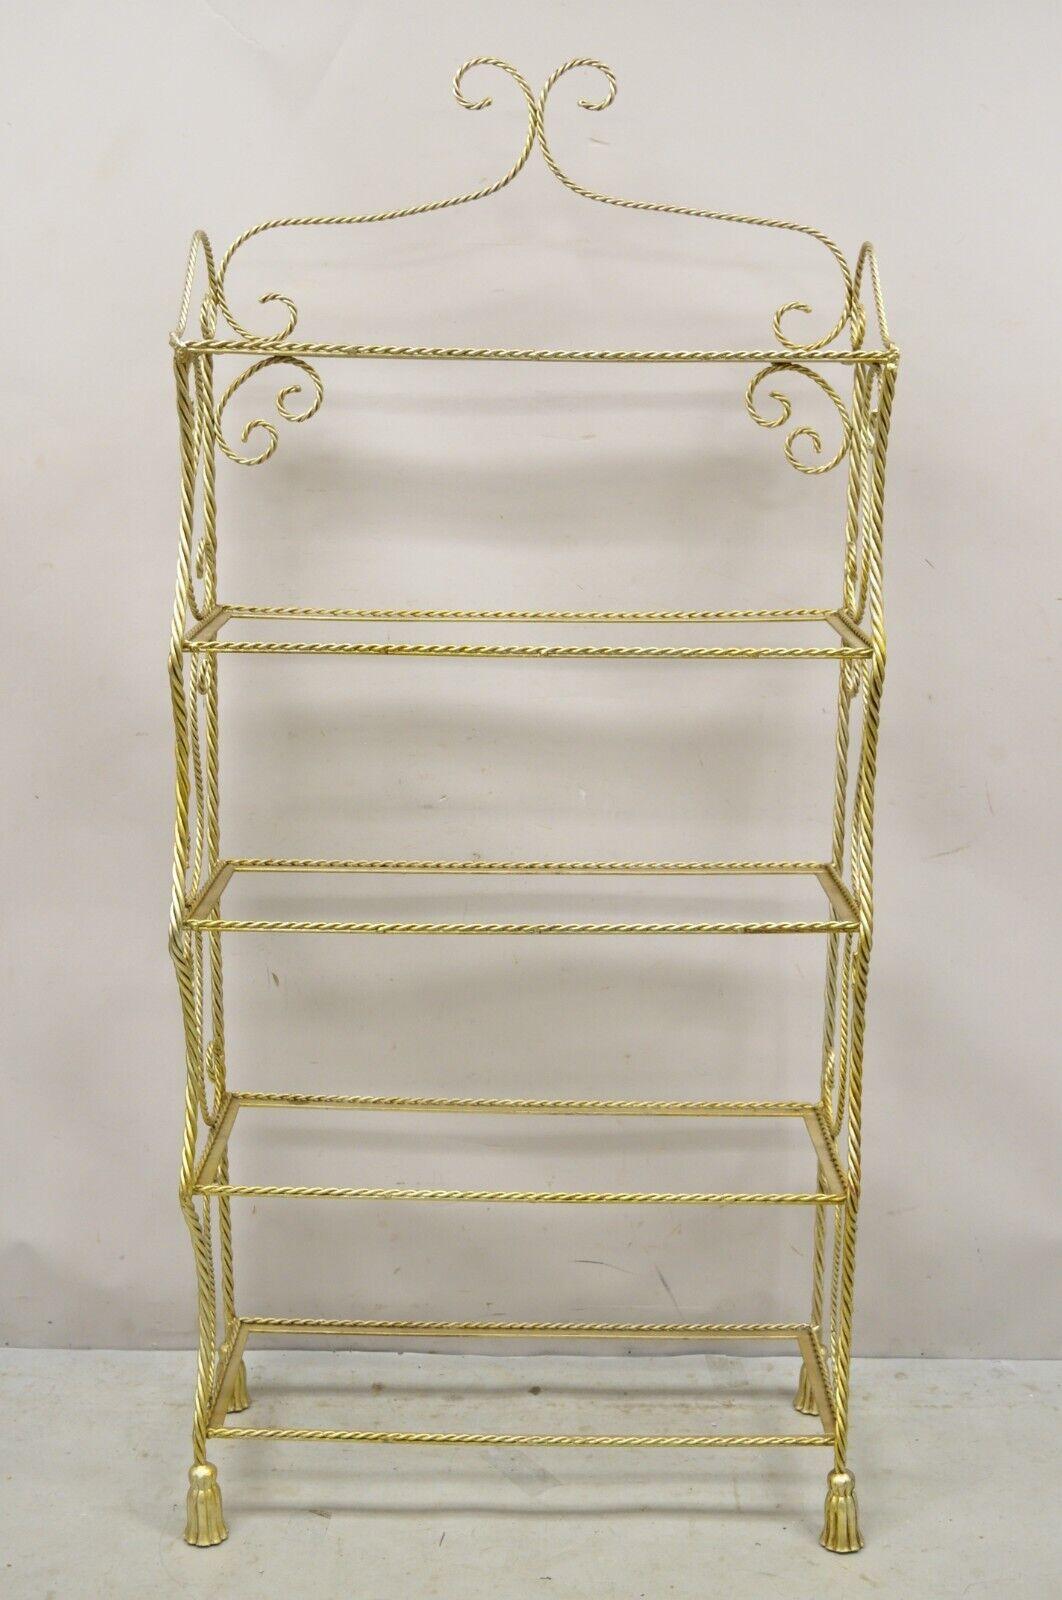 Italian Hollywood Regency Rope Tassel Silver Gold 5 Tier Iron Bakers Rack Shelf. Item features has(5) tiers (no glass), iron rope form frame, silver/gold gilt leaf finish, scrolling design, quality Italian craftsmanship. Circa Mid 20th